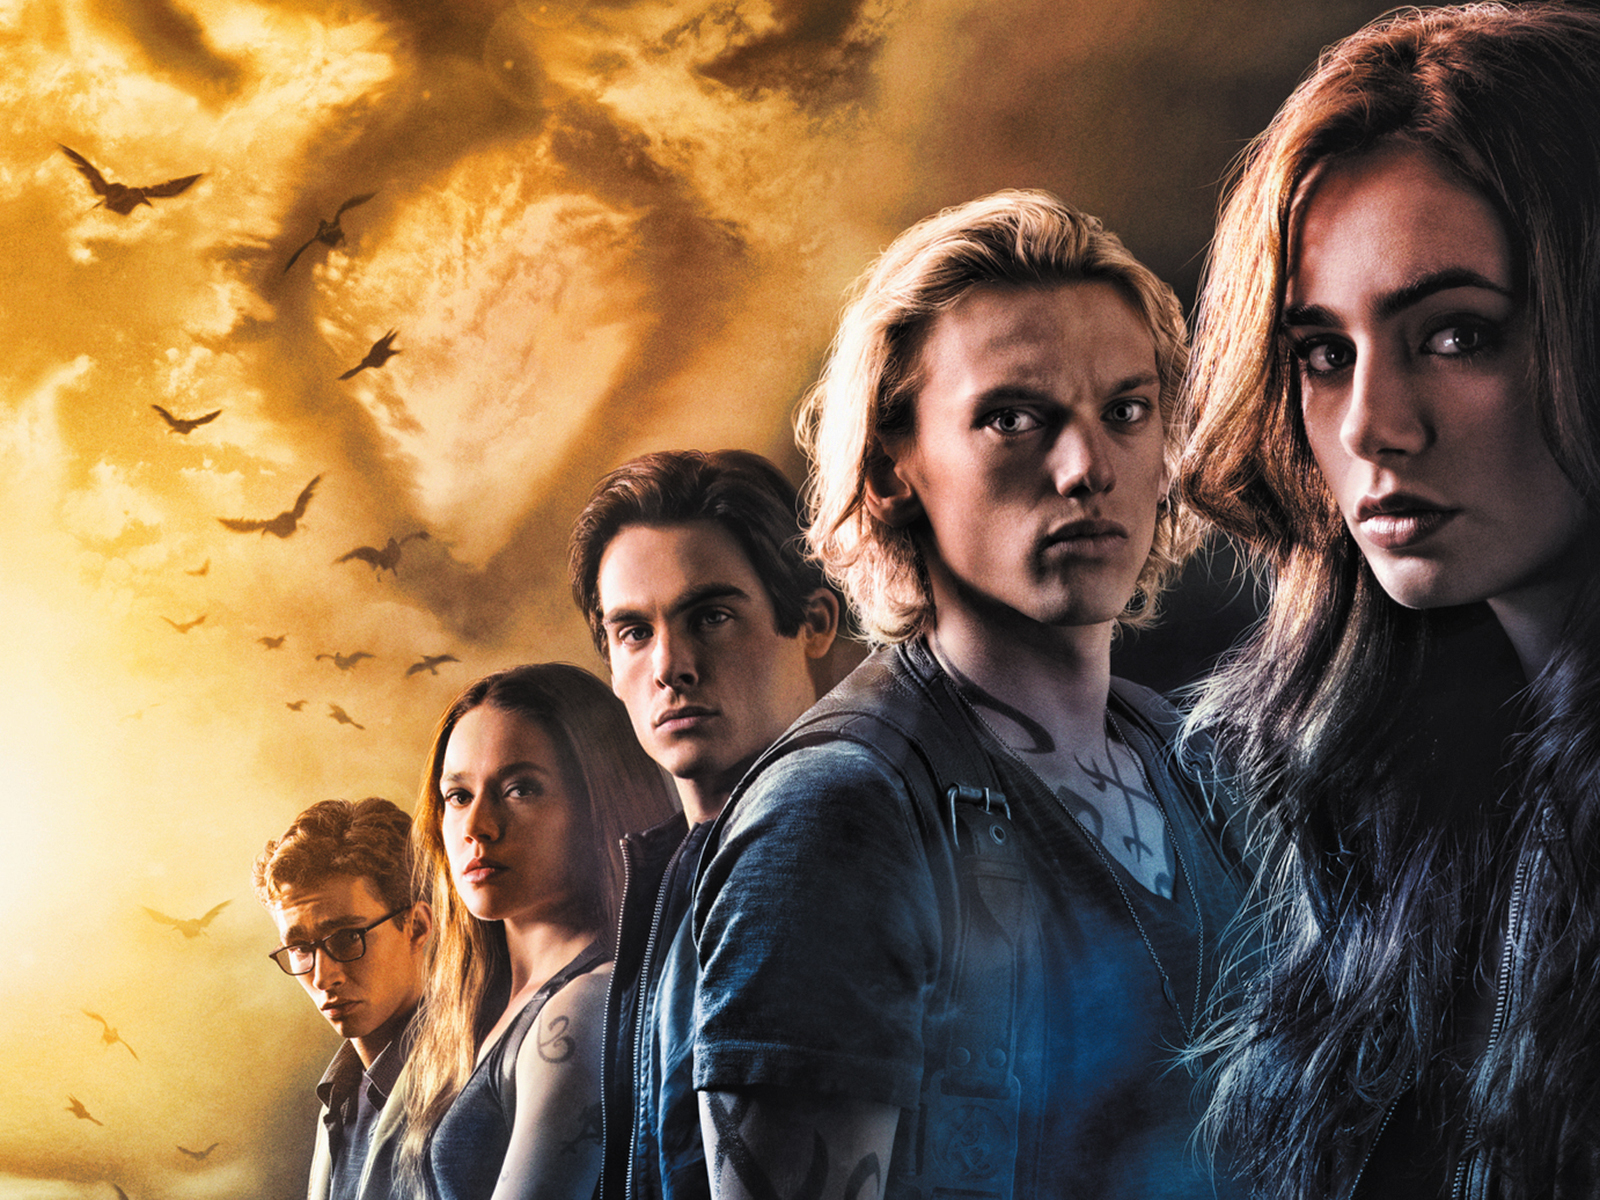 movie, the mortal instruments: city of bones, jamie campbell bower, jemima west, jonathan rhys meyers, lily collins, robert sheehan